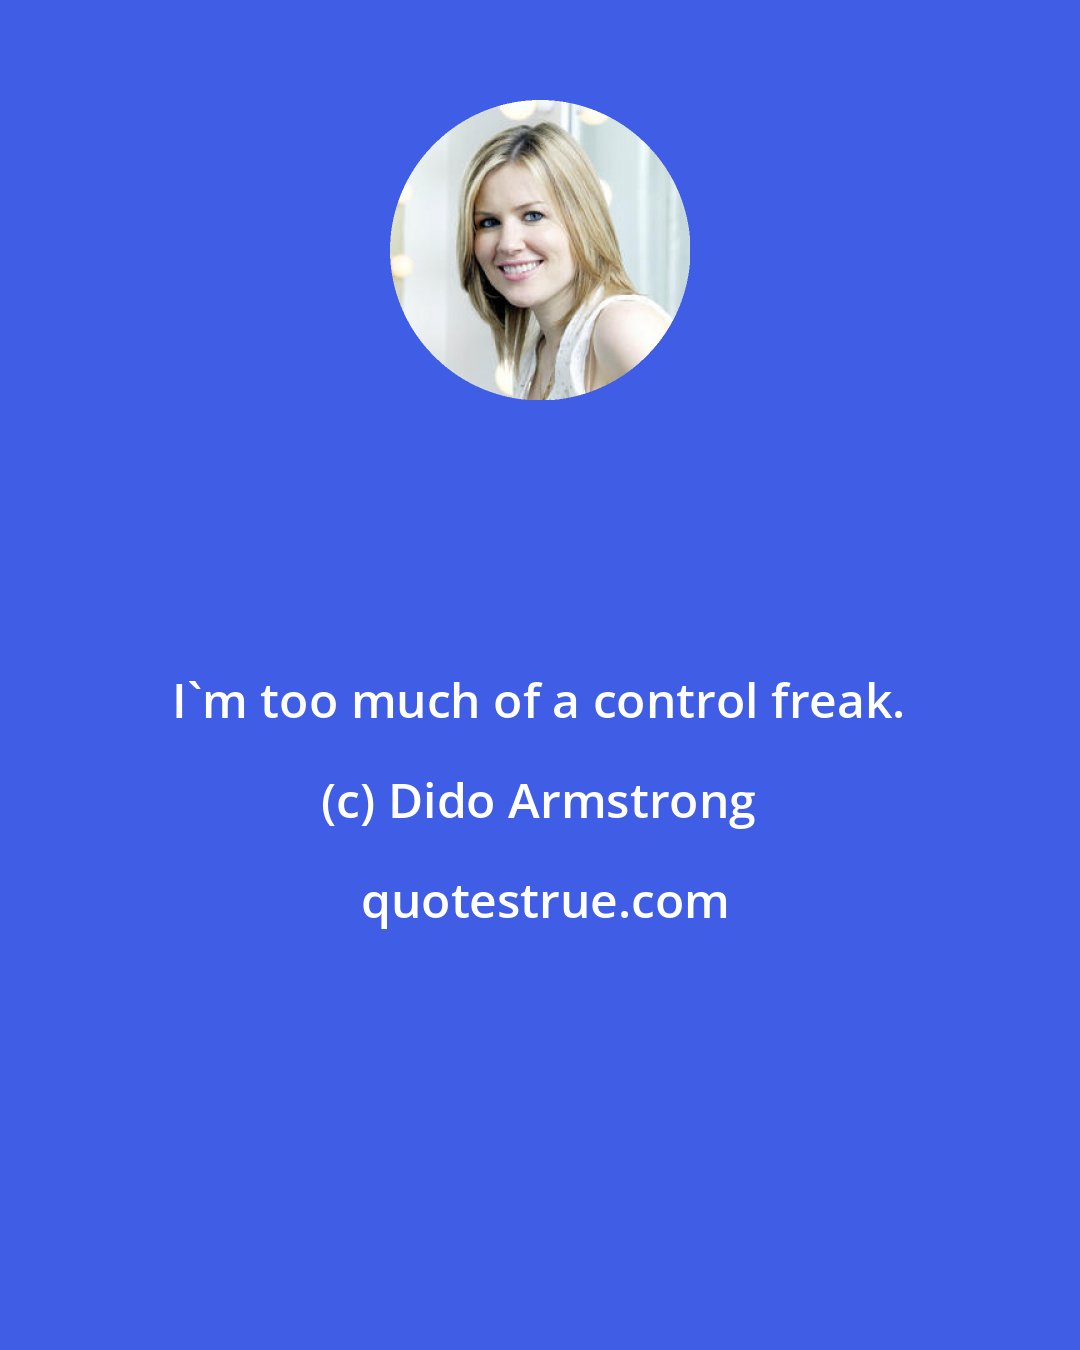 Dido Armstrong: I'm too much of a control freak.